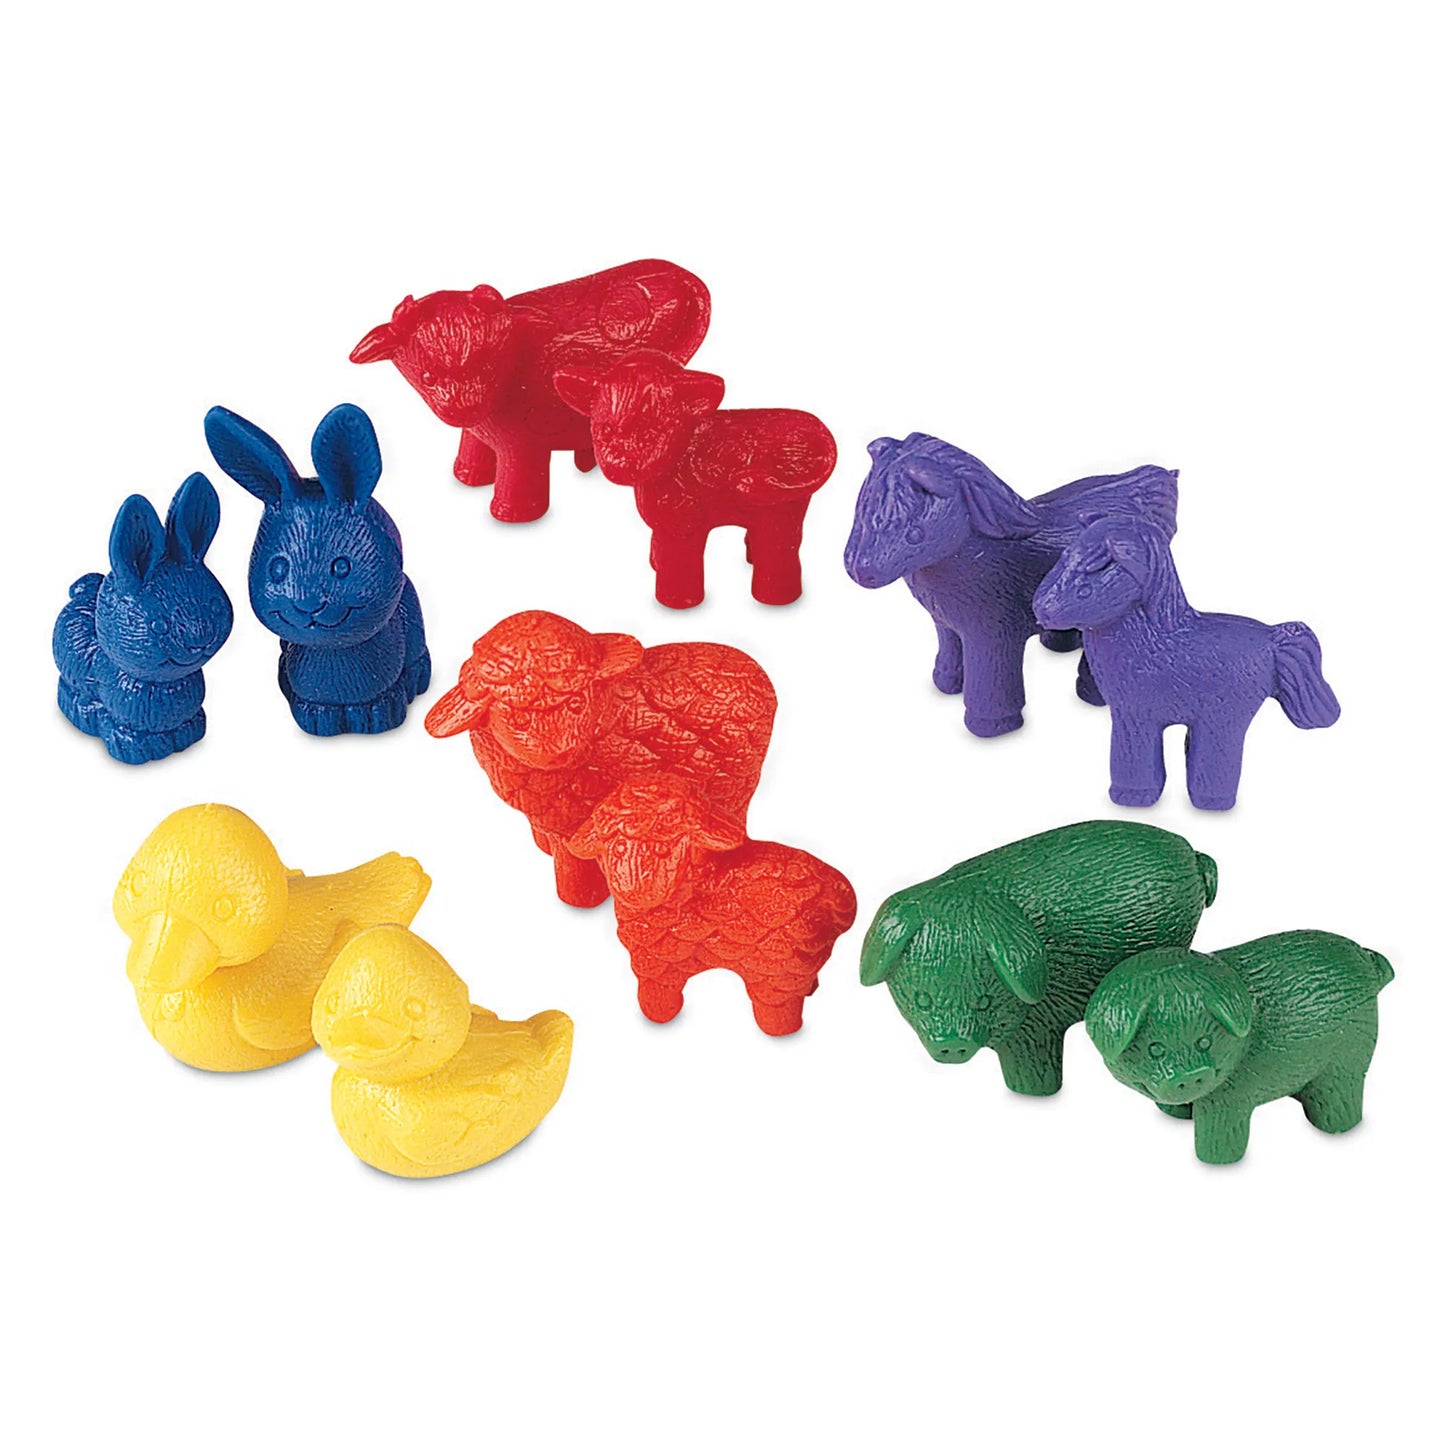 Learning Resources Friendly Farm Animal Counters Set of 144